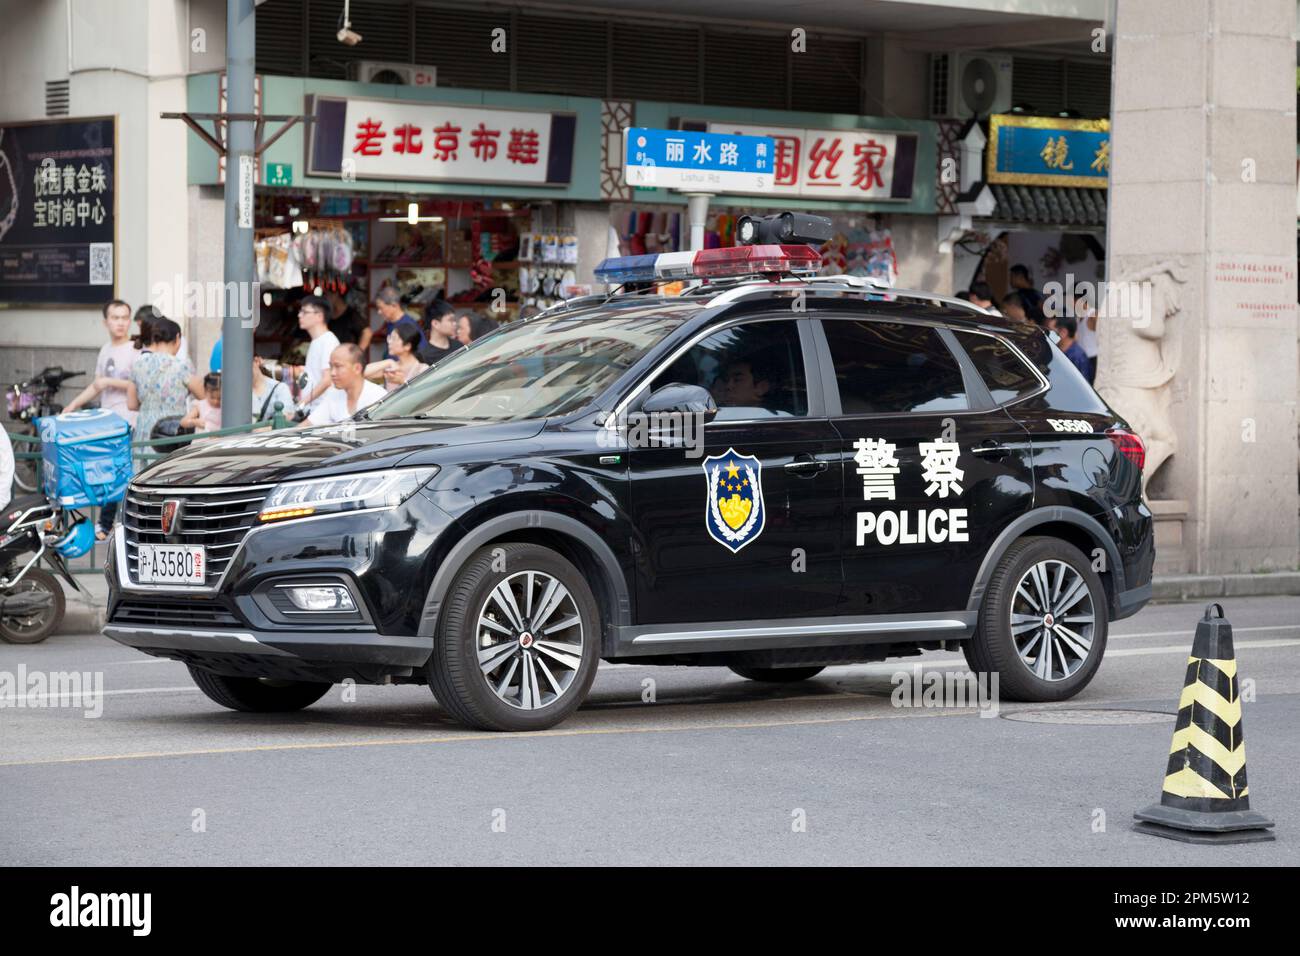 Shanghai, China - August 10 2018: Police SUV parked outside of Yuyuan market, Shanghai's popular tourist spot. Stock Photo